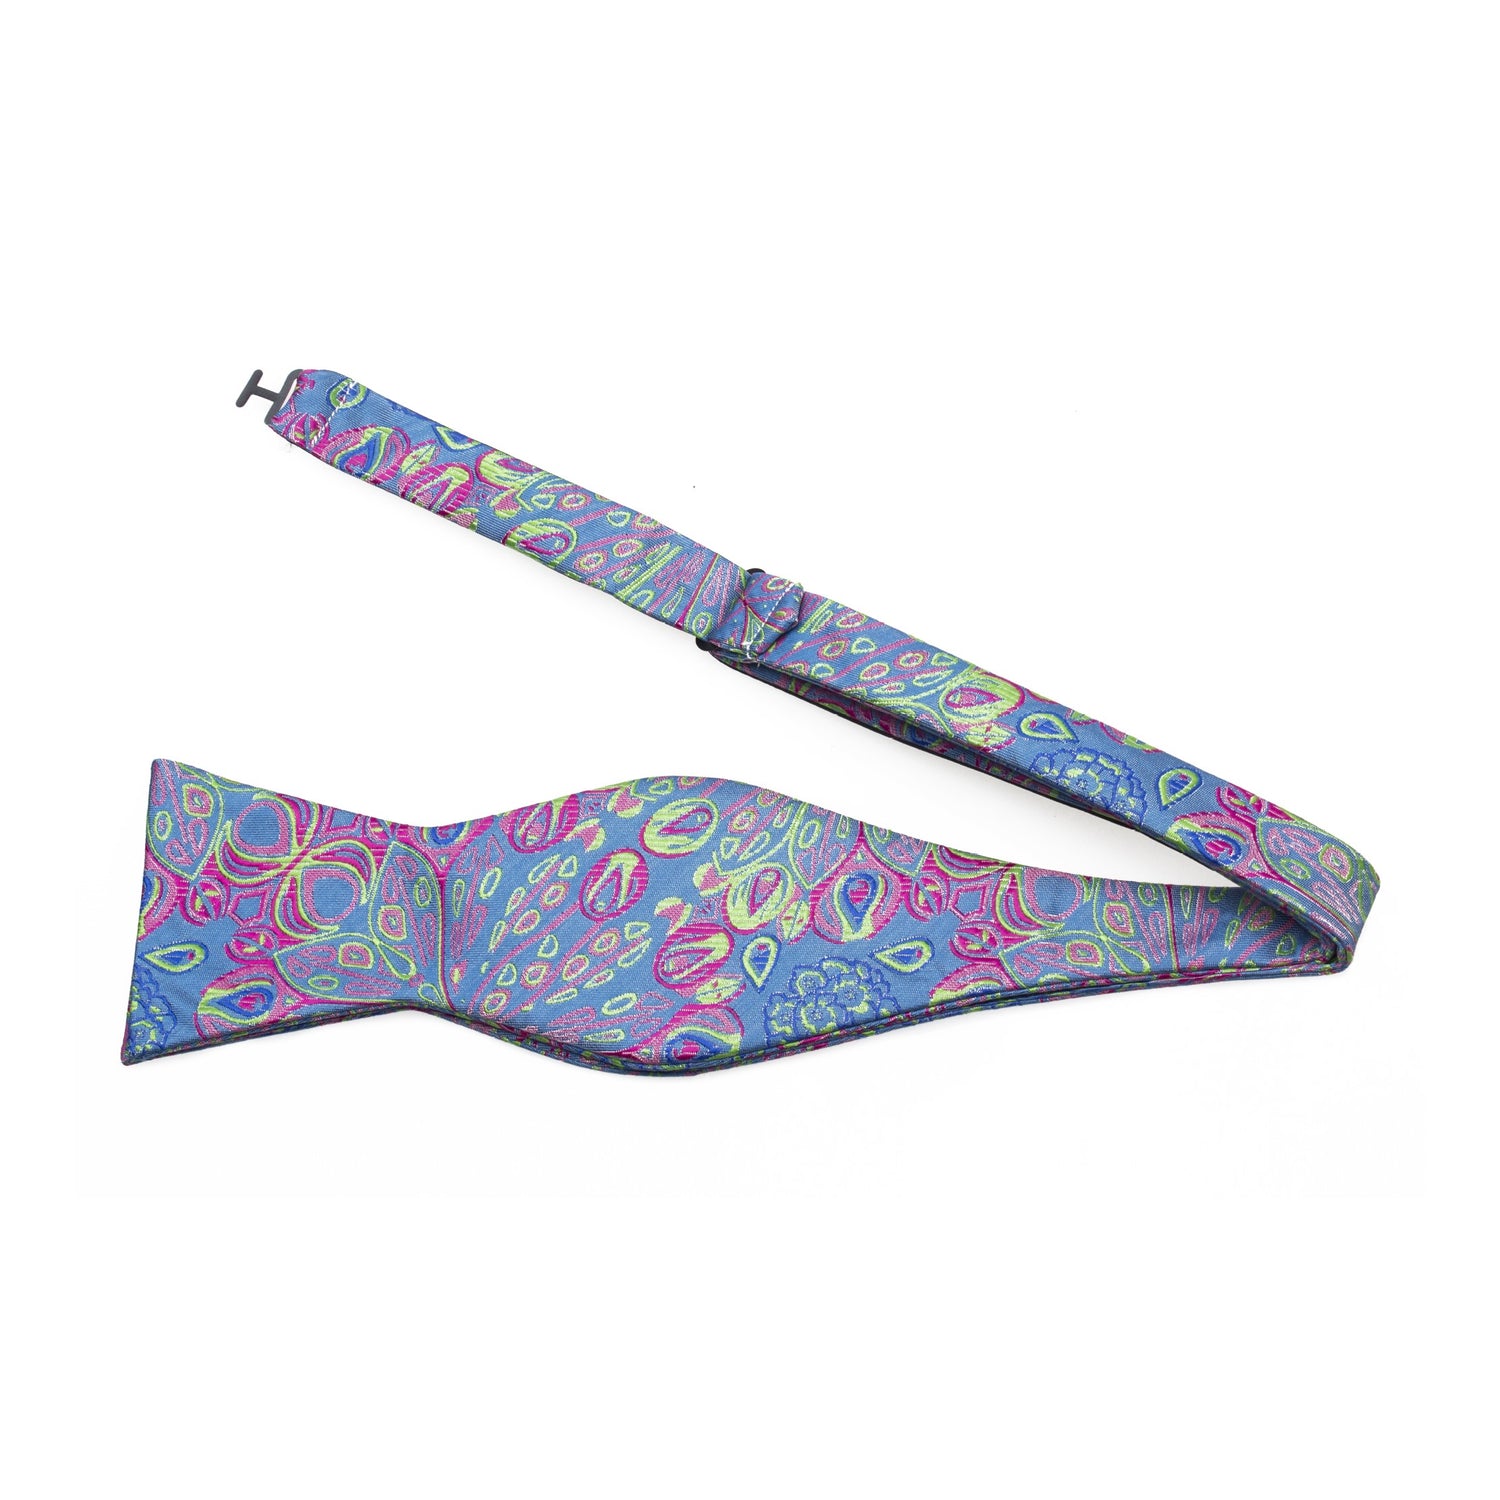 A Neon Blue, Yellow, Pink Abstract Peacock Feather Pattern Silk Self Tie Bow Tie Untied